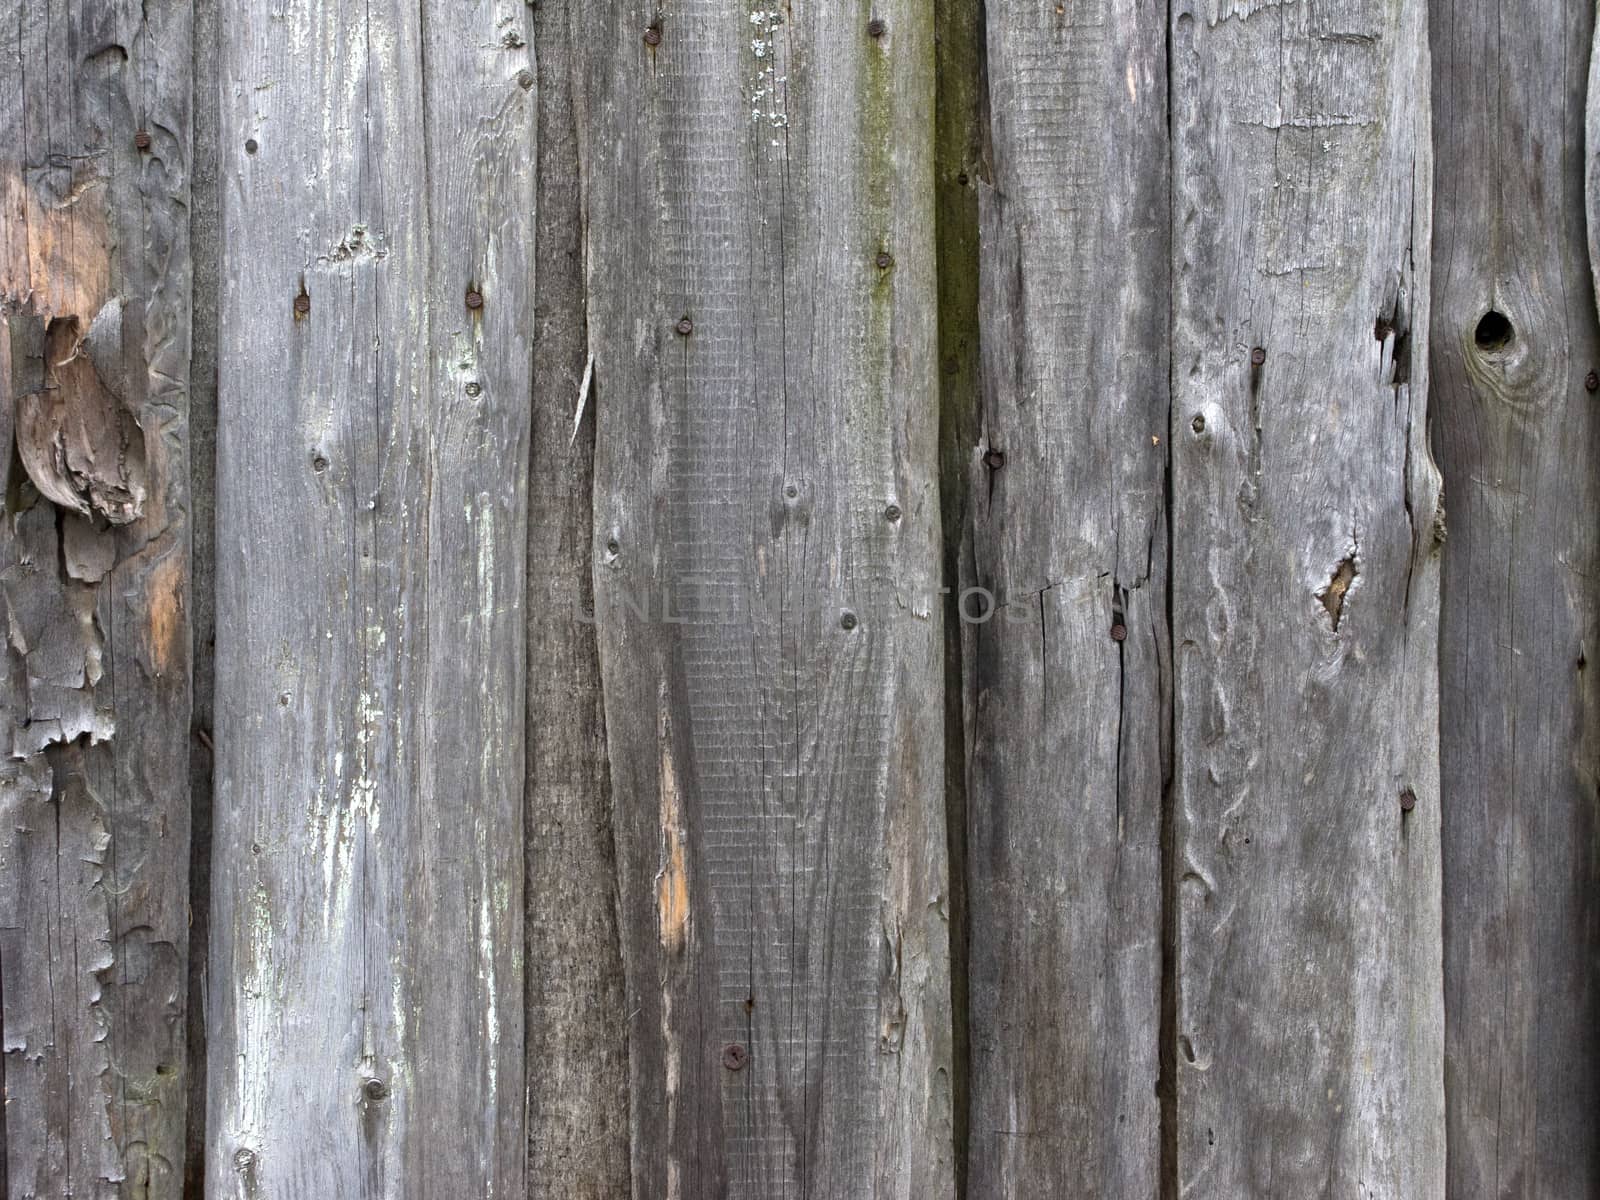 Close up of old dark wooden surface